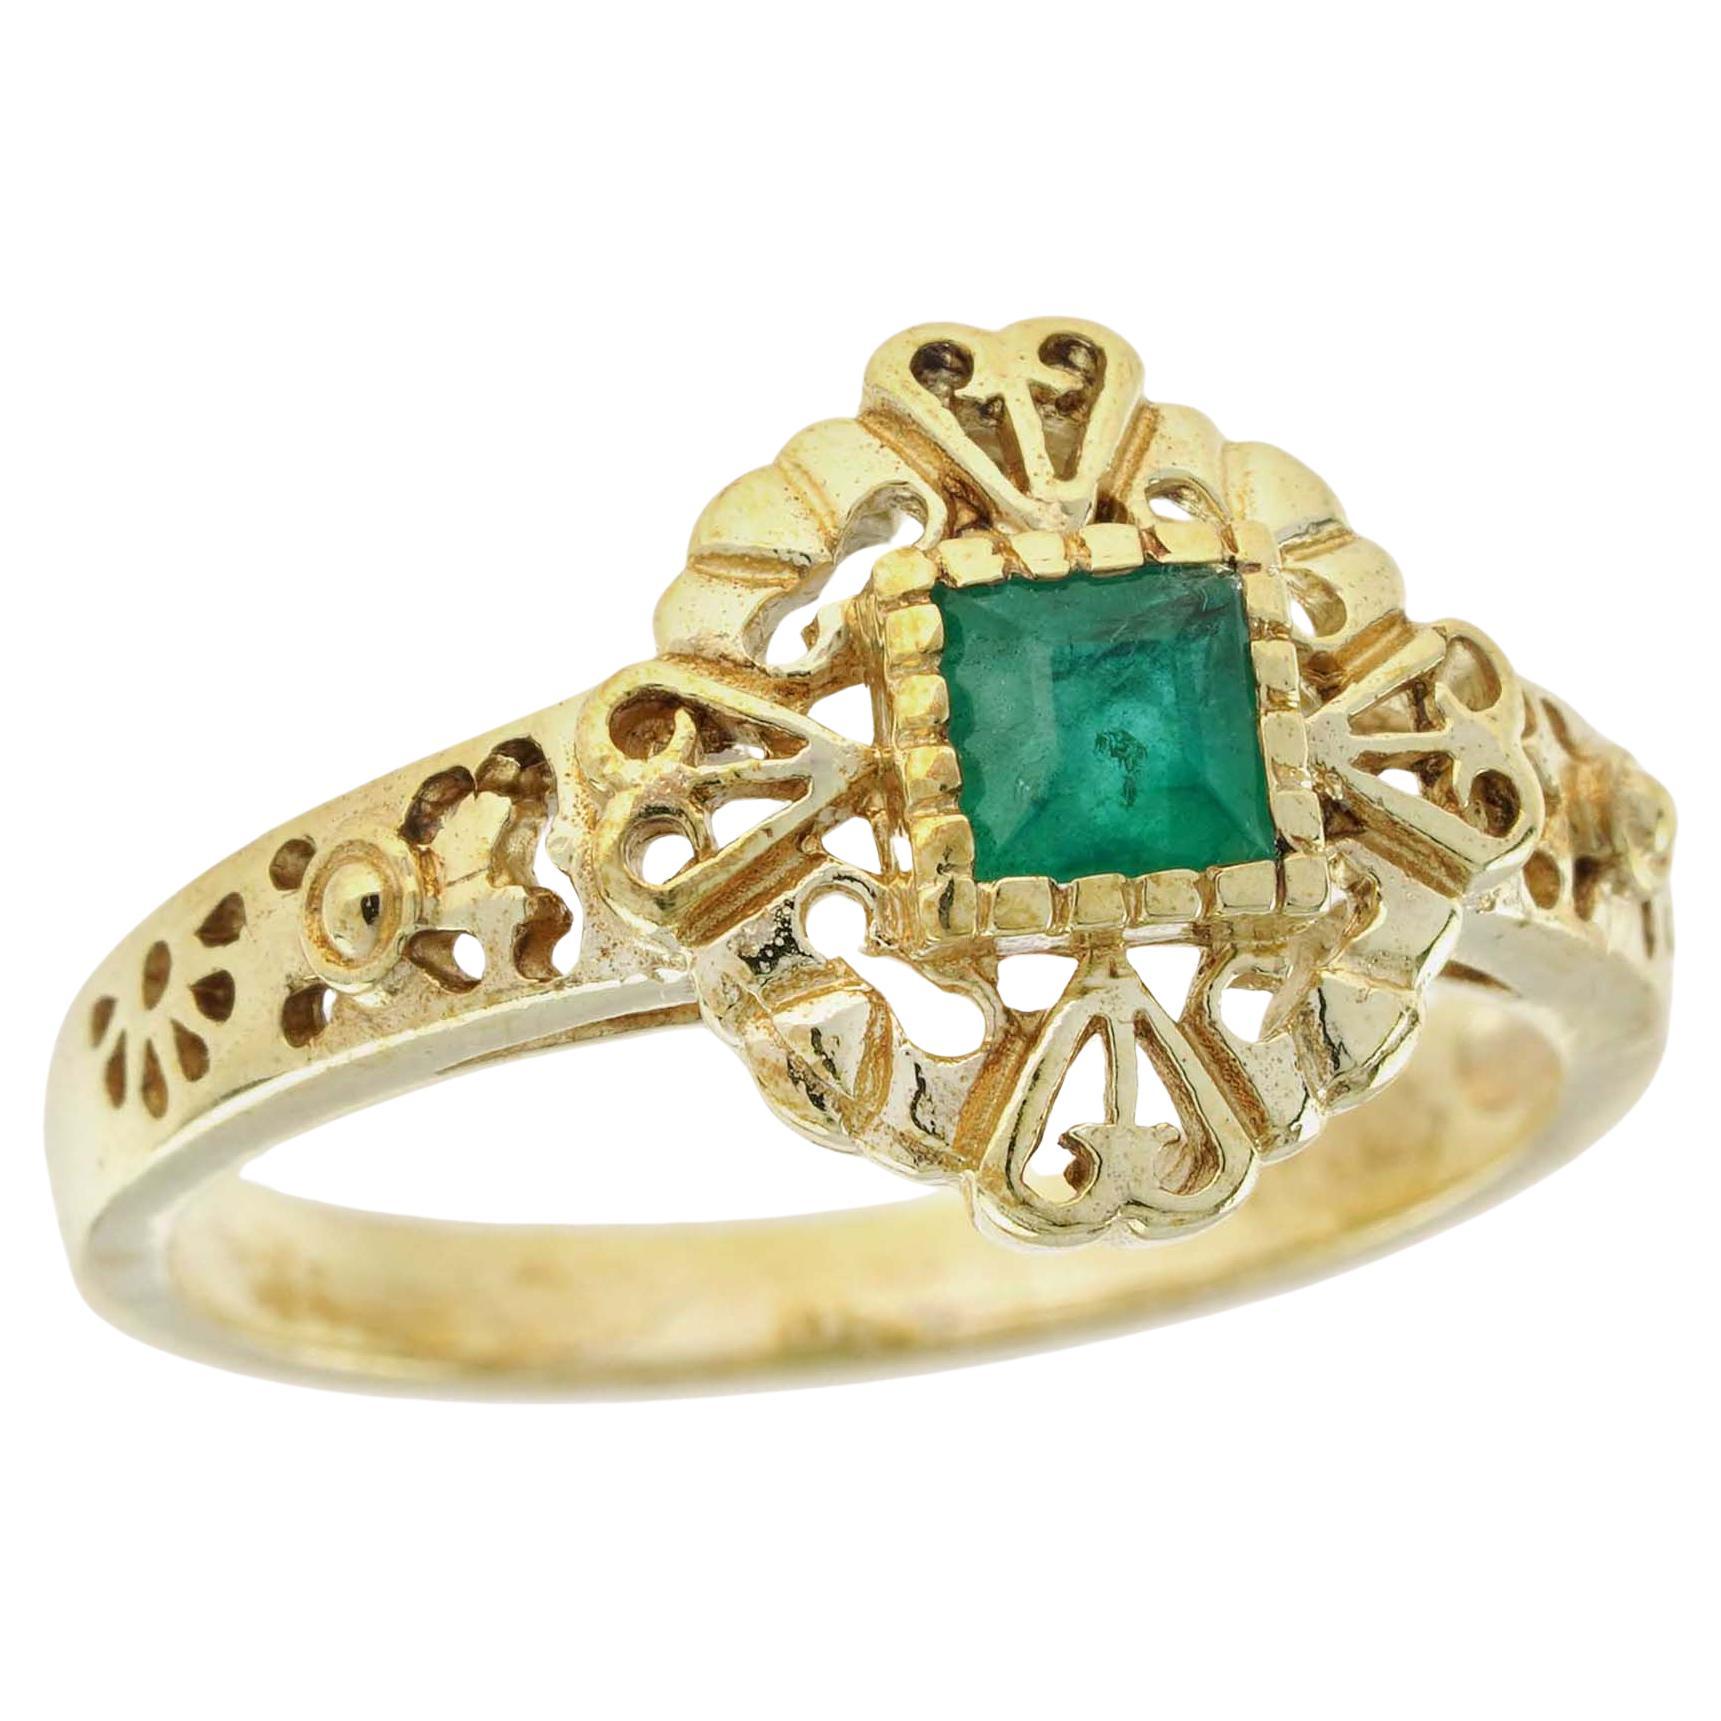 Natural Square Emerald Vintage Style Solitaire Heart Filigree Ring in 9K Gold